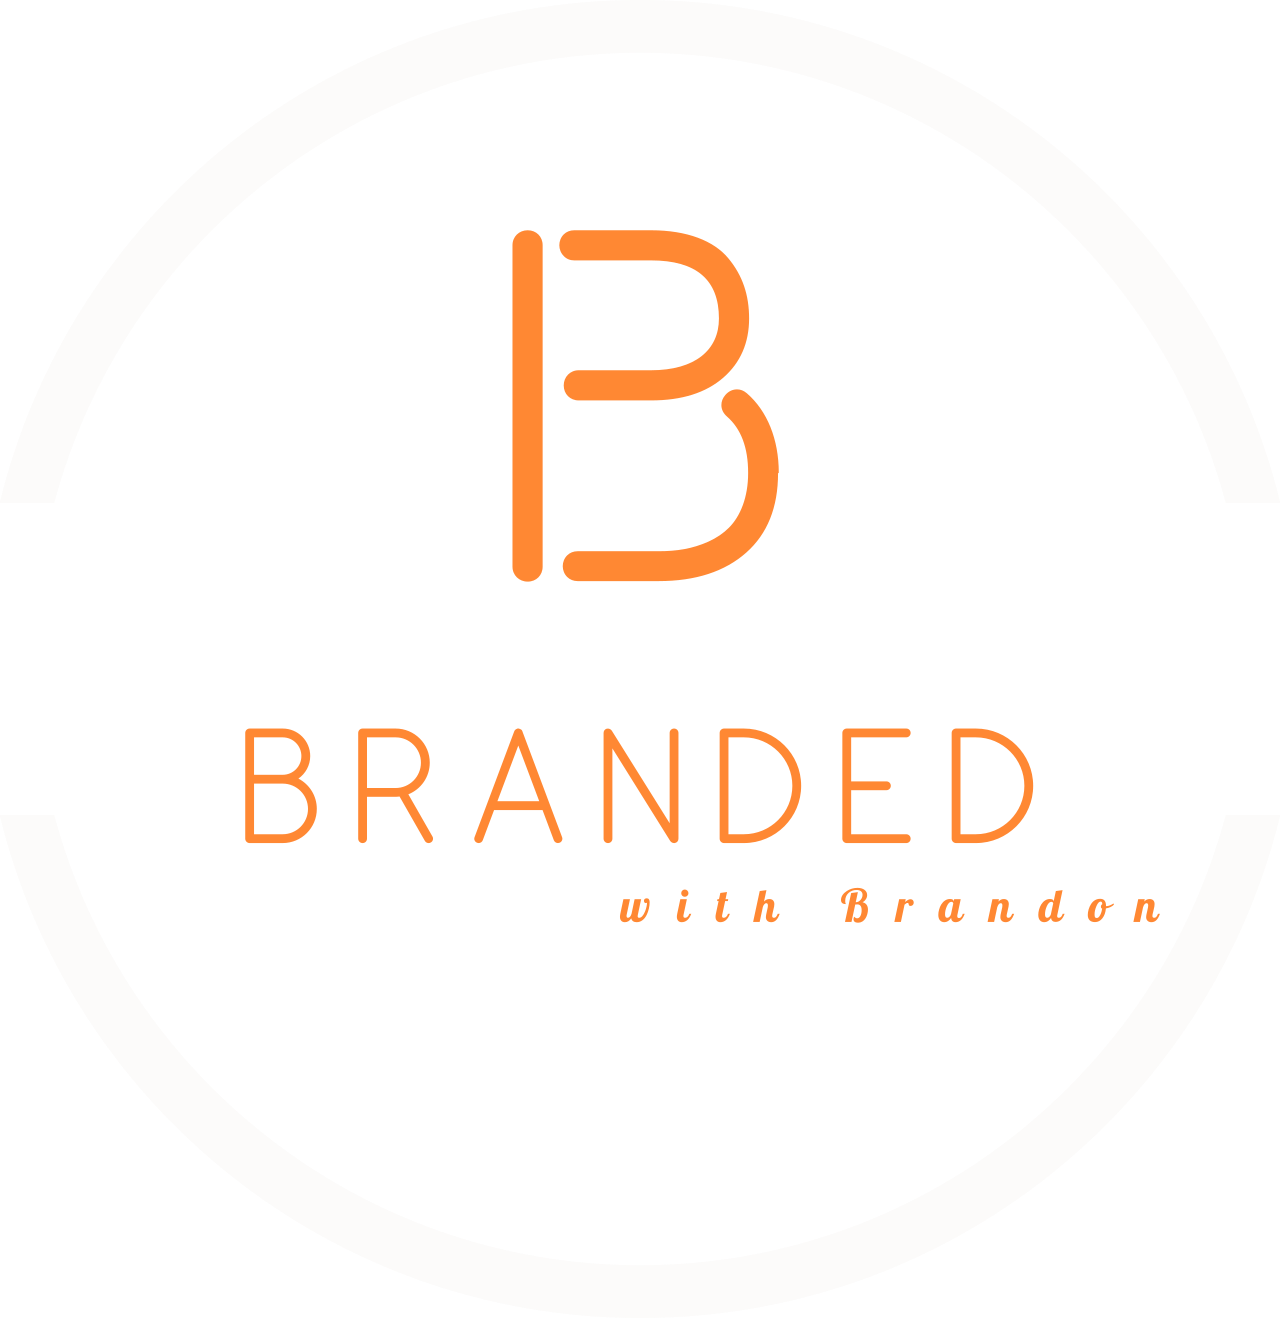 Branded with Brandon's web page